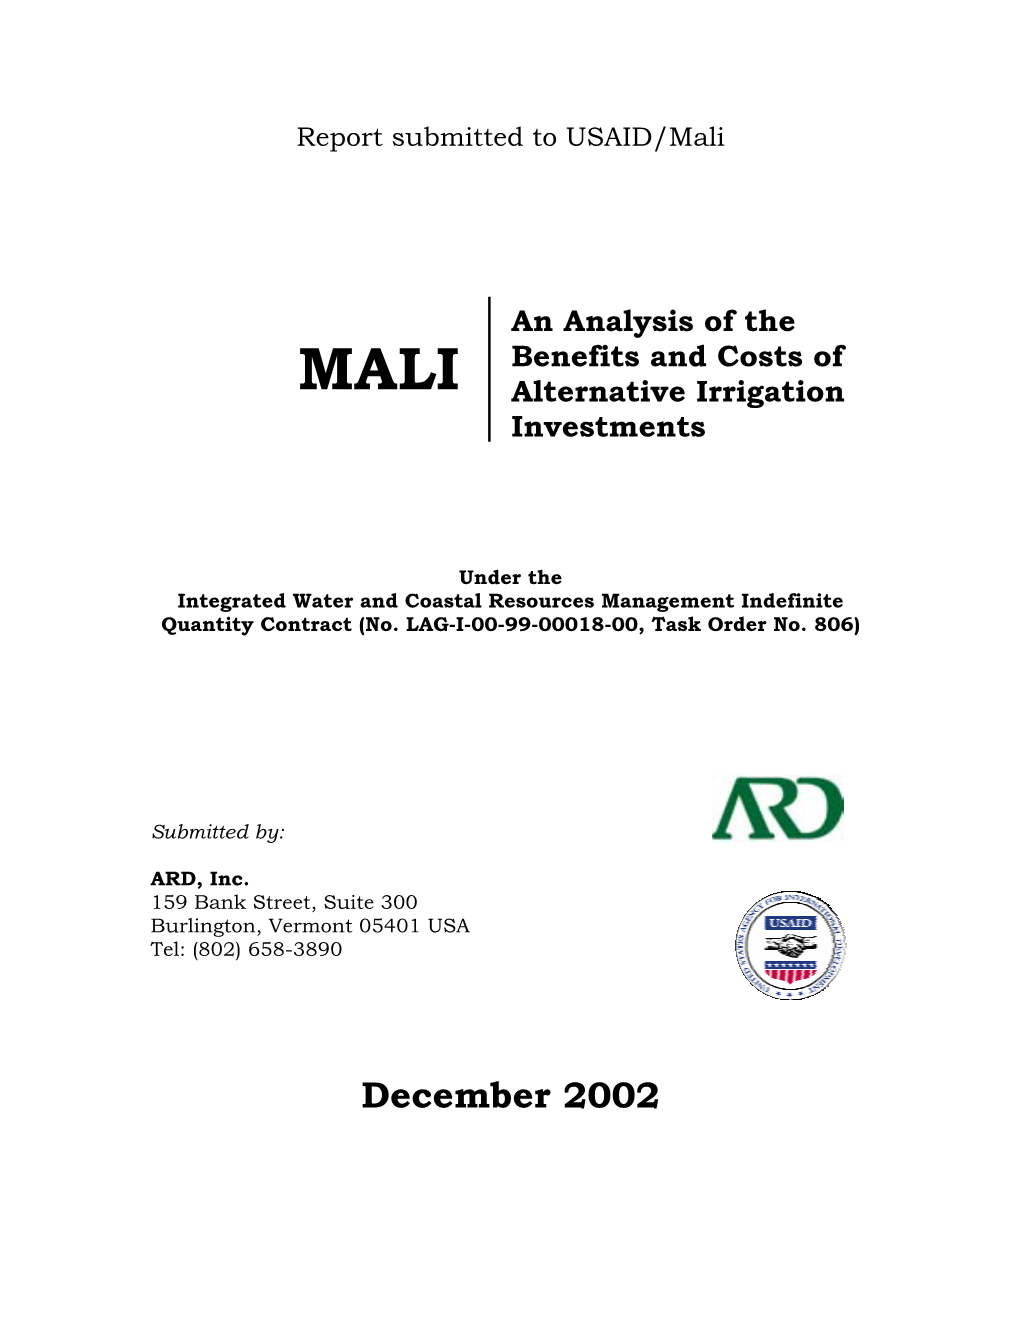 December 2002 Table of Contents